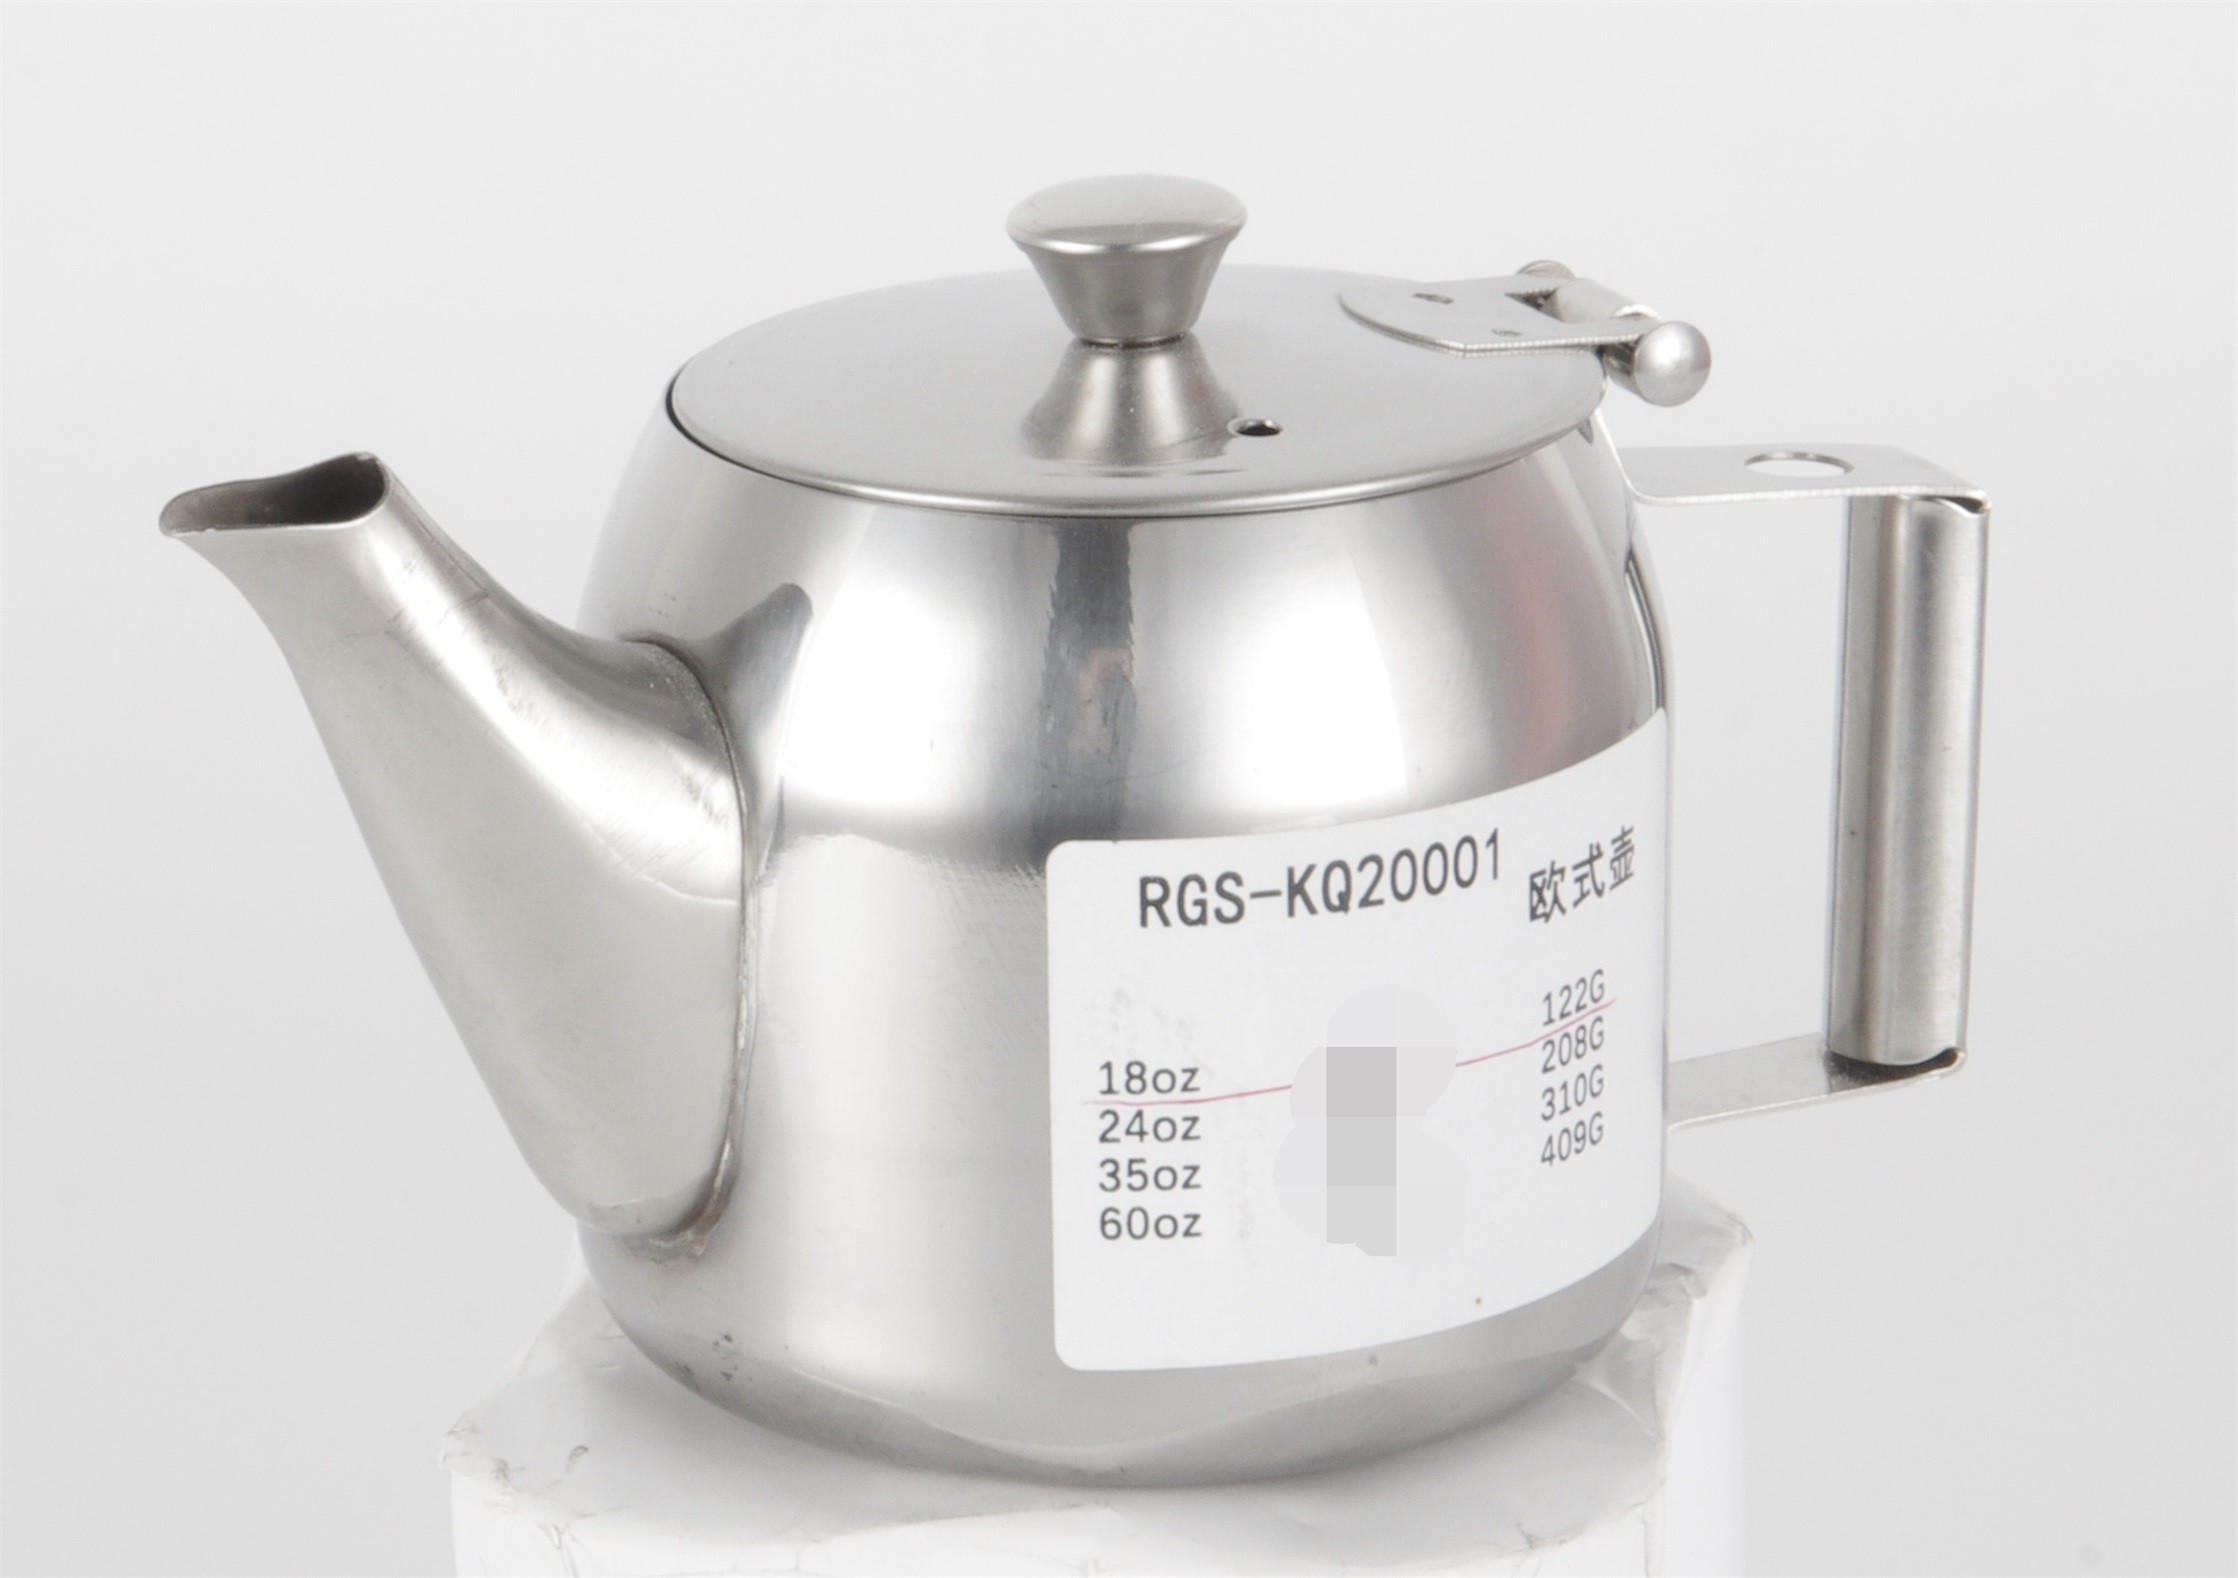 Evergreen stainless steel tea kettle Supply for cooking